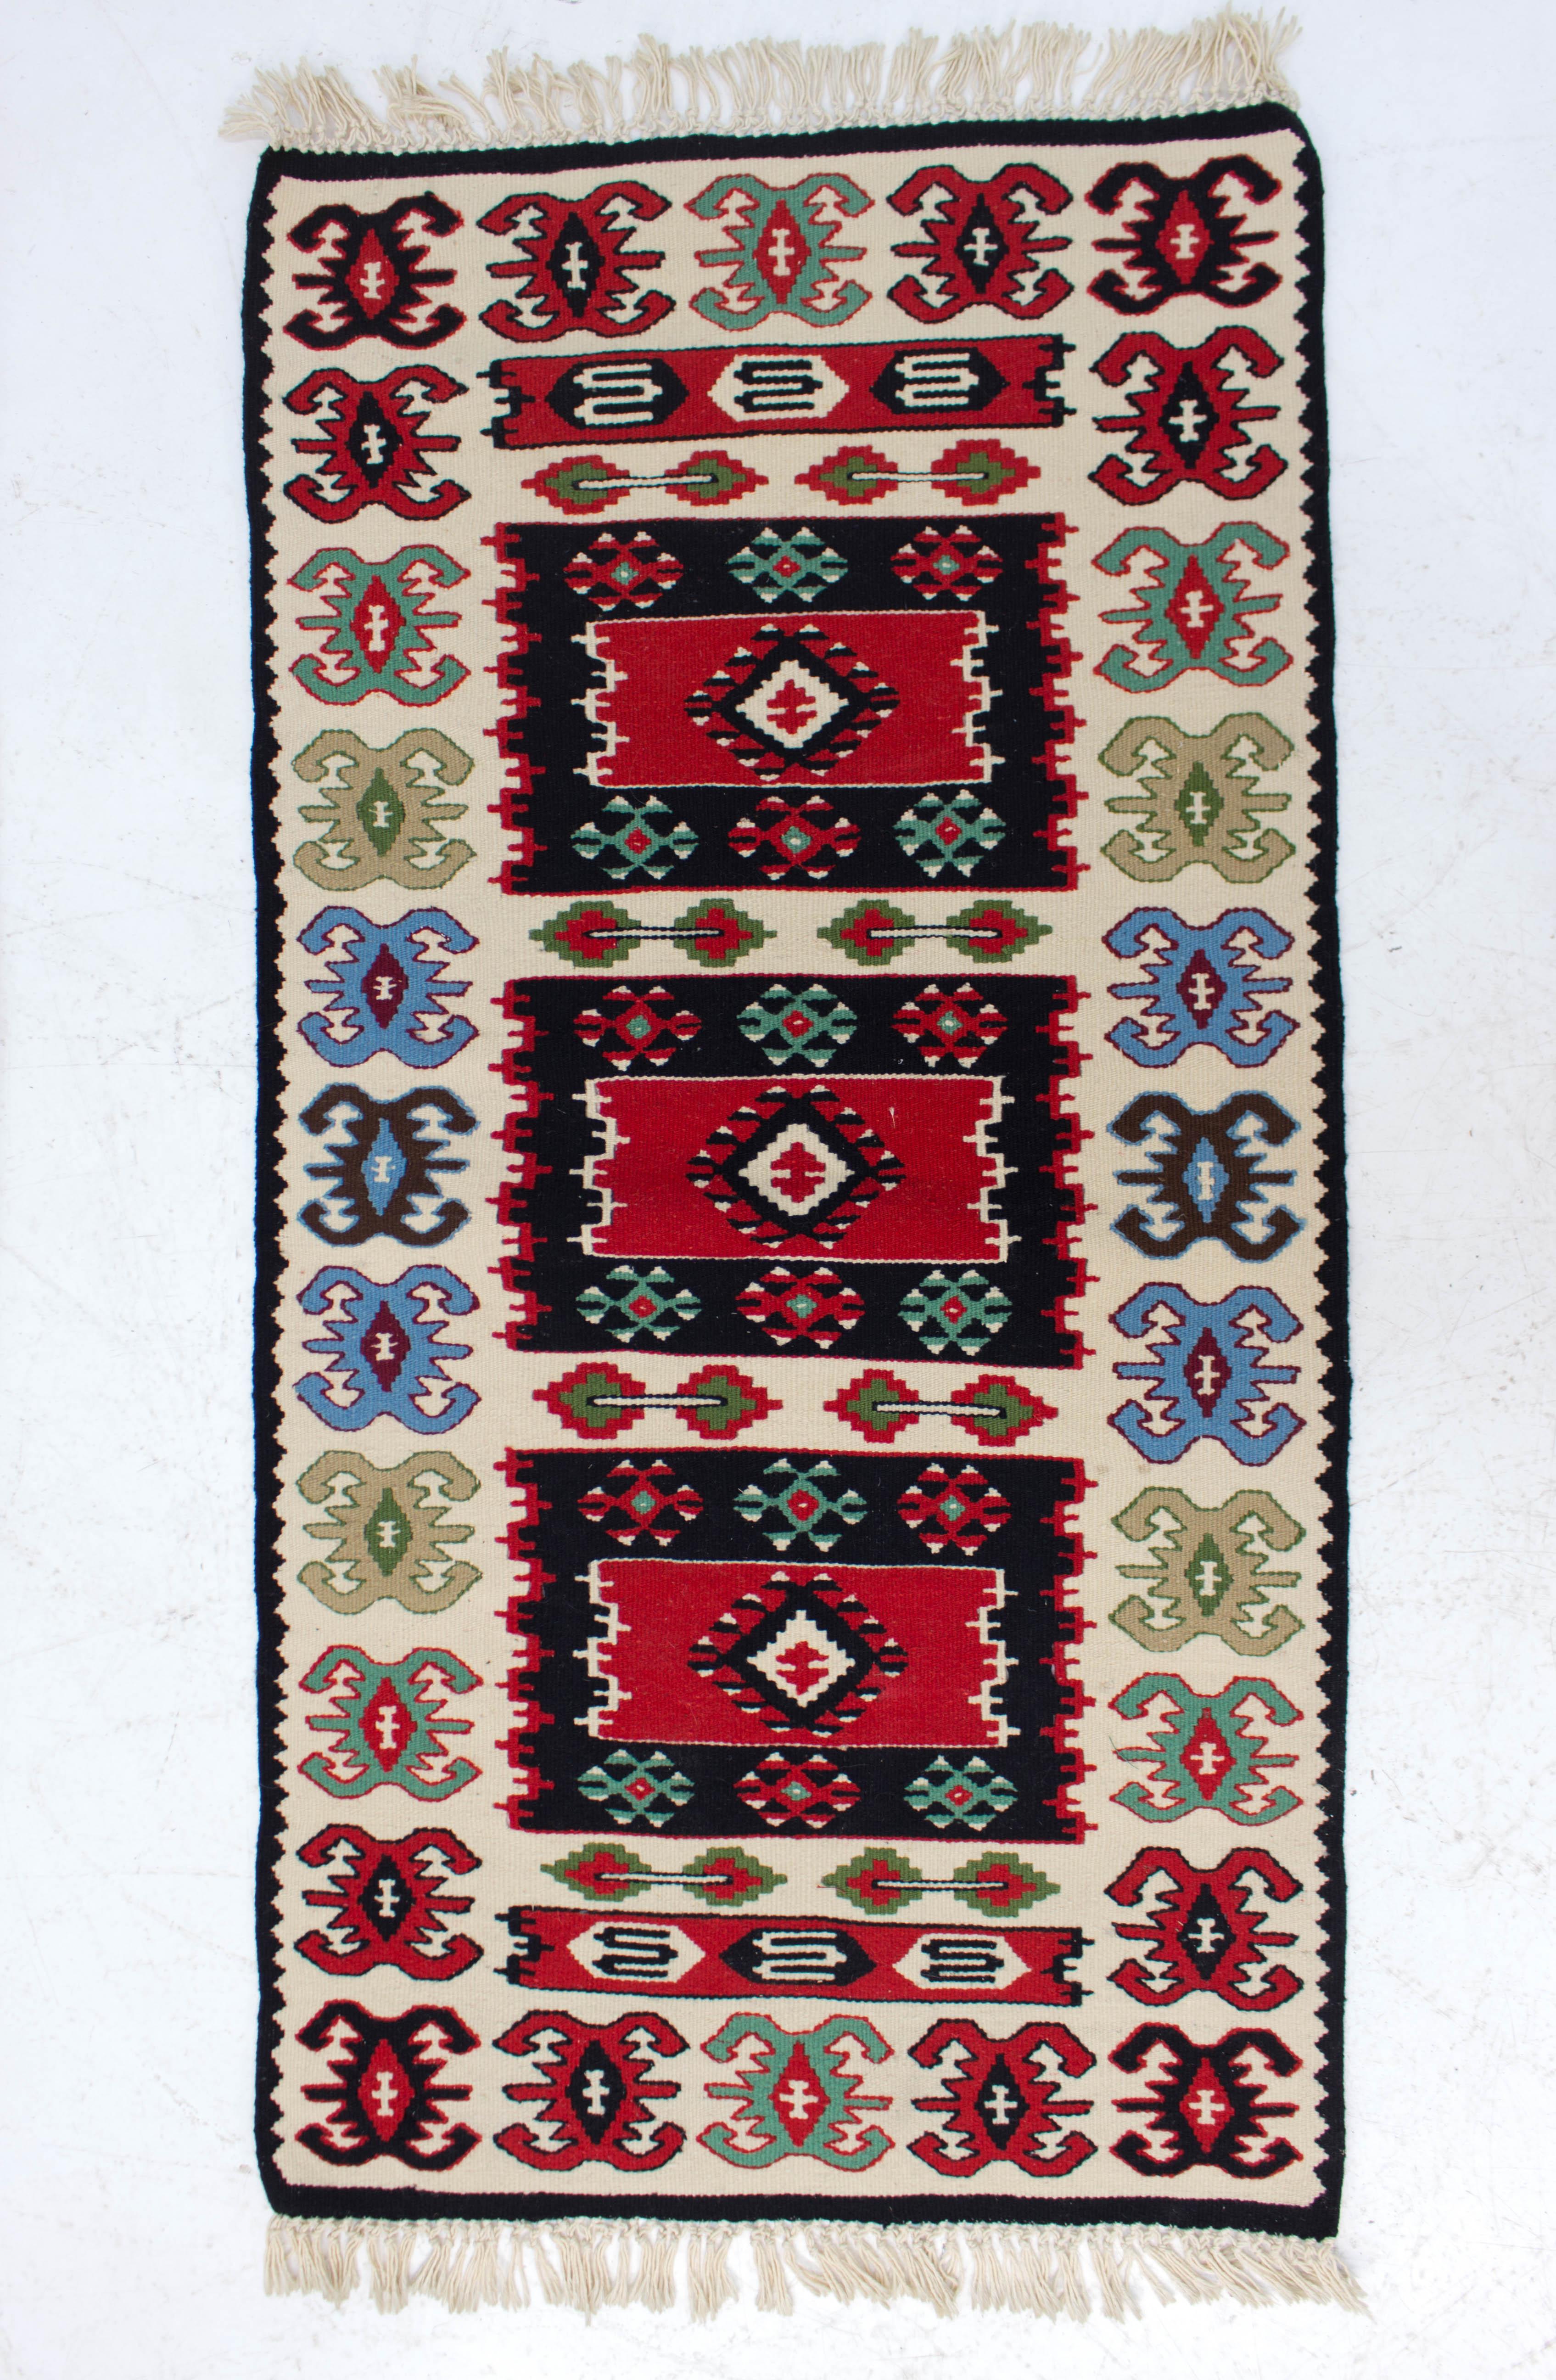 Set of five wool Kilim rugs from 1960s made in Czechoslovakia in very good condition. Sizes: 2 pieces: 120 x 61cm, 1 piece: 120 x 42cm, 2 pieces: 30 x 30cm.